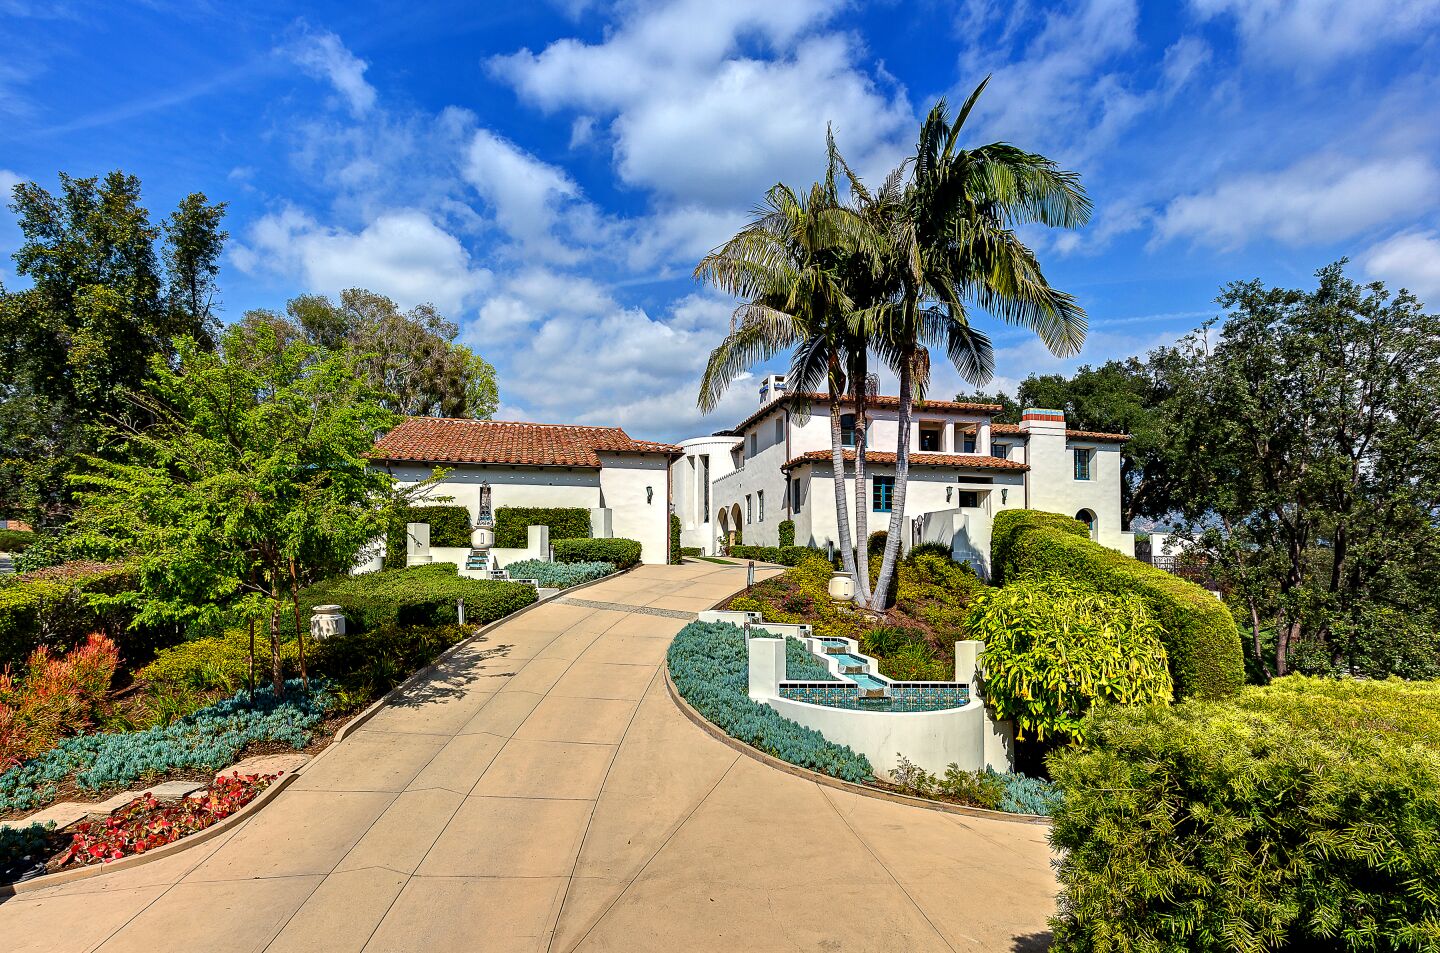 The 1920s mansion blends Spanish Colonial Revival and Art Deco styles.